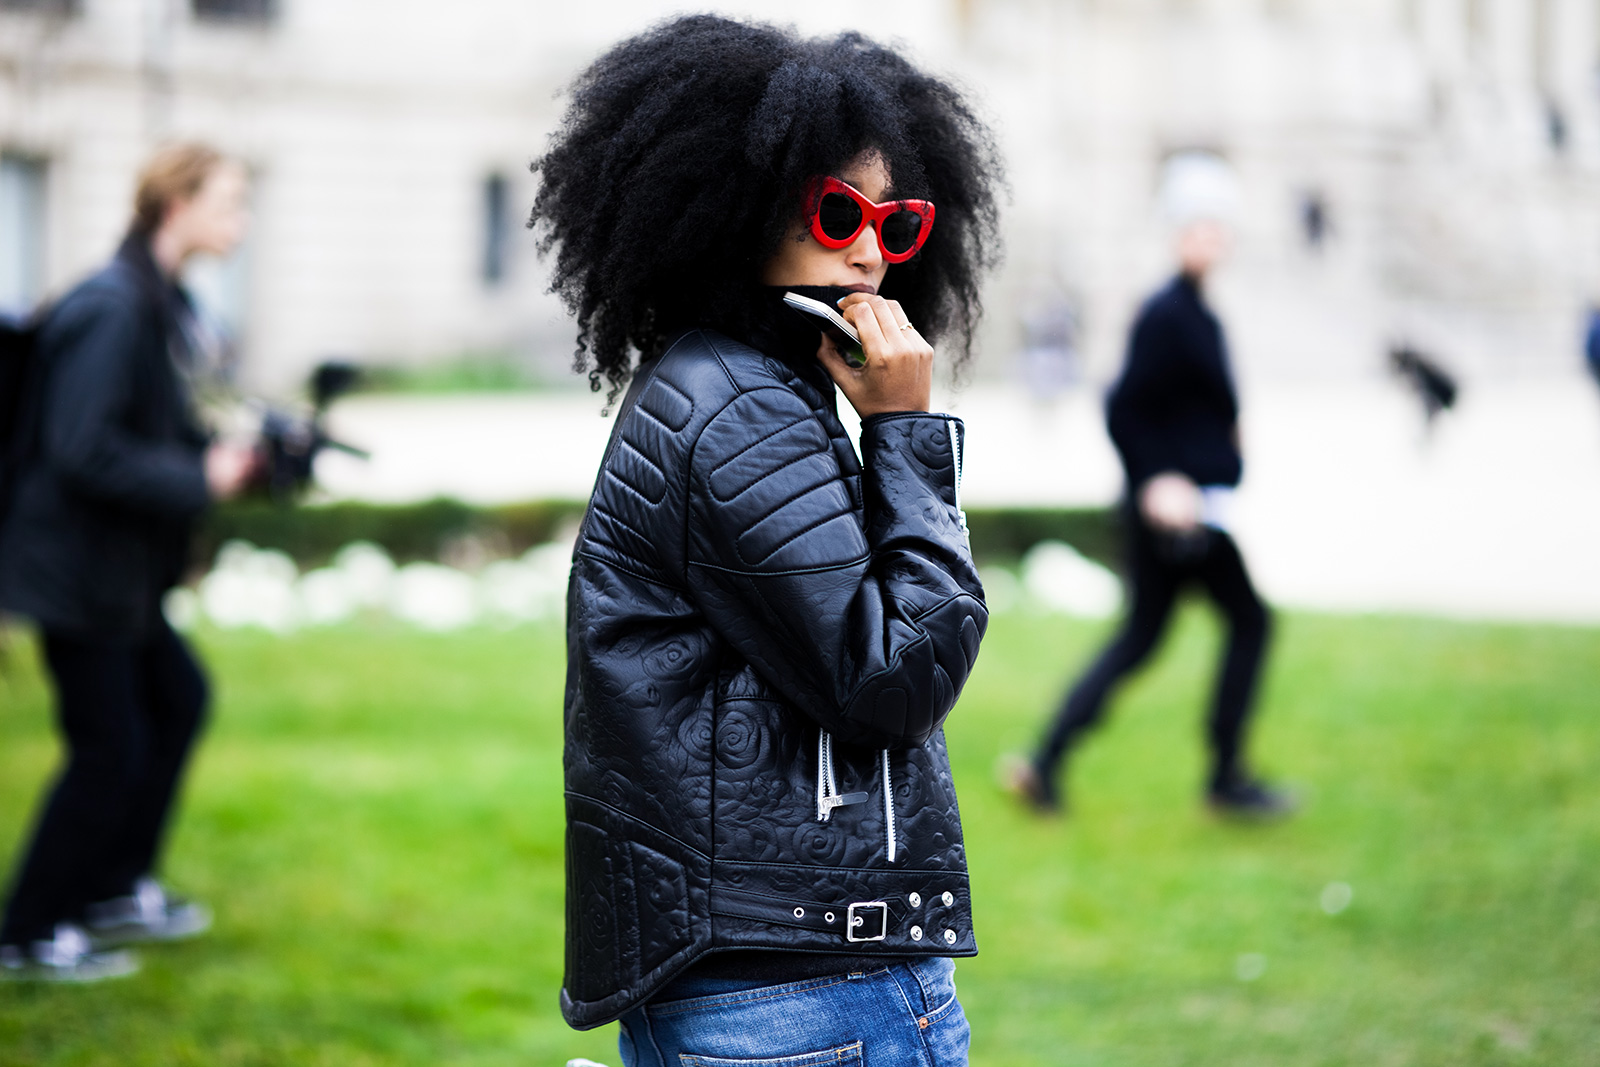 Julia Sarr-Jamois wearing a black leather jacket and red Celine sunglasses before the Chanel Fall 2015 fashion show at Grand Palais in Paris, France